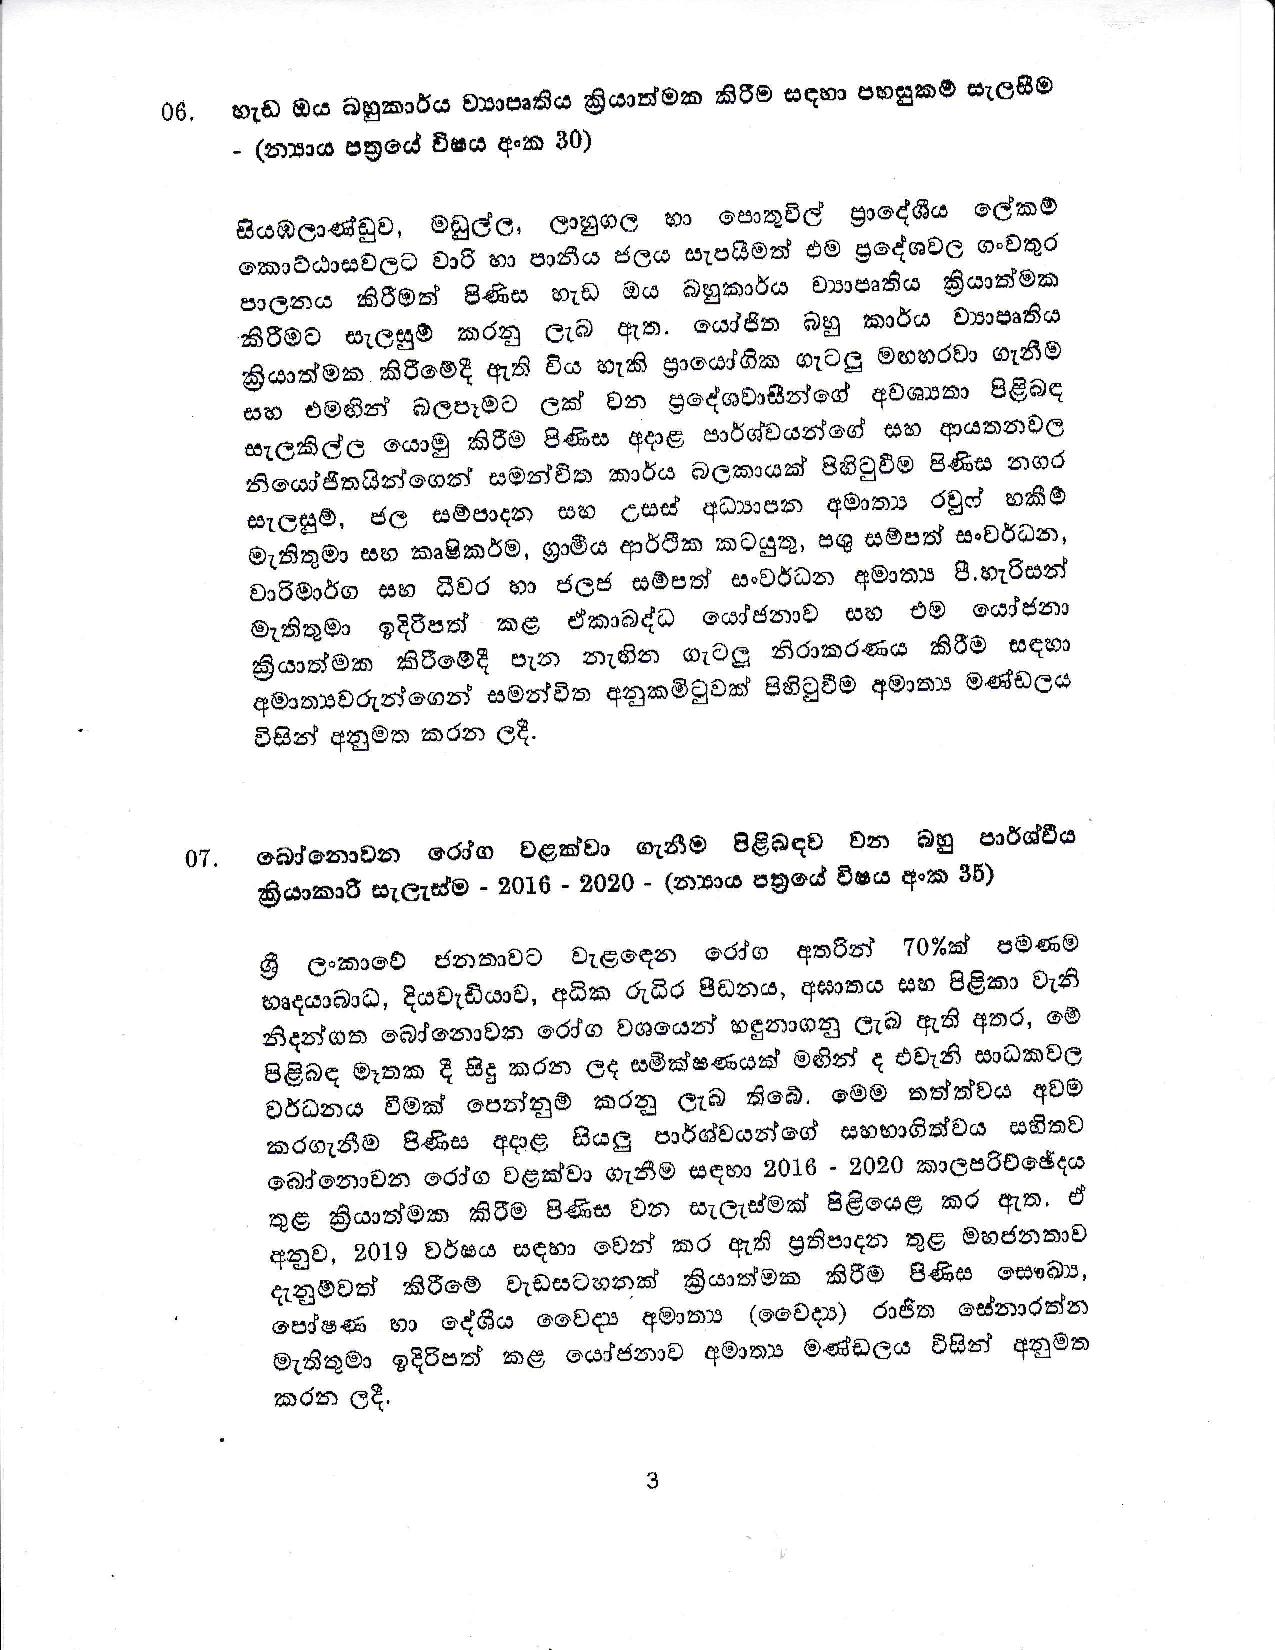 Cabinet Decision on 30.04.2019 page 003